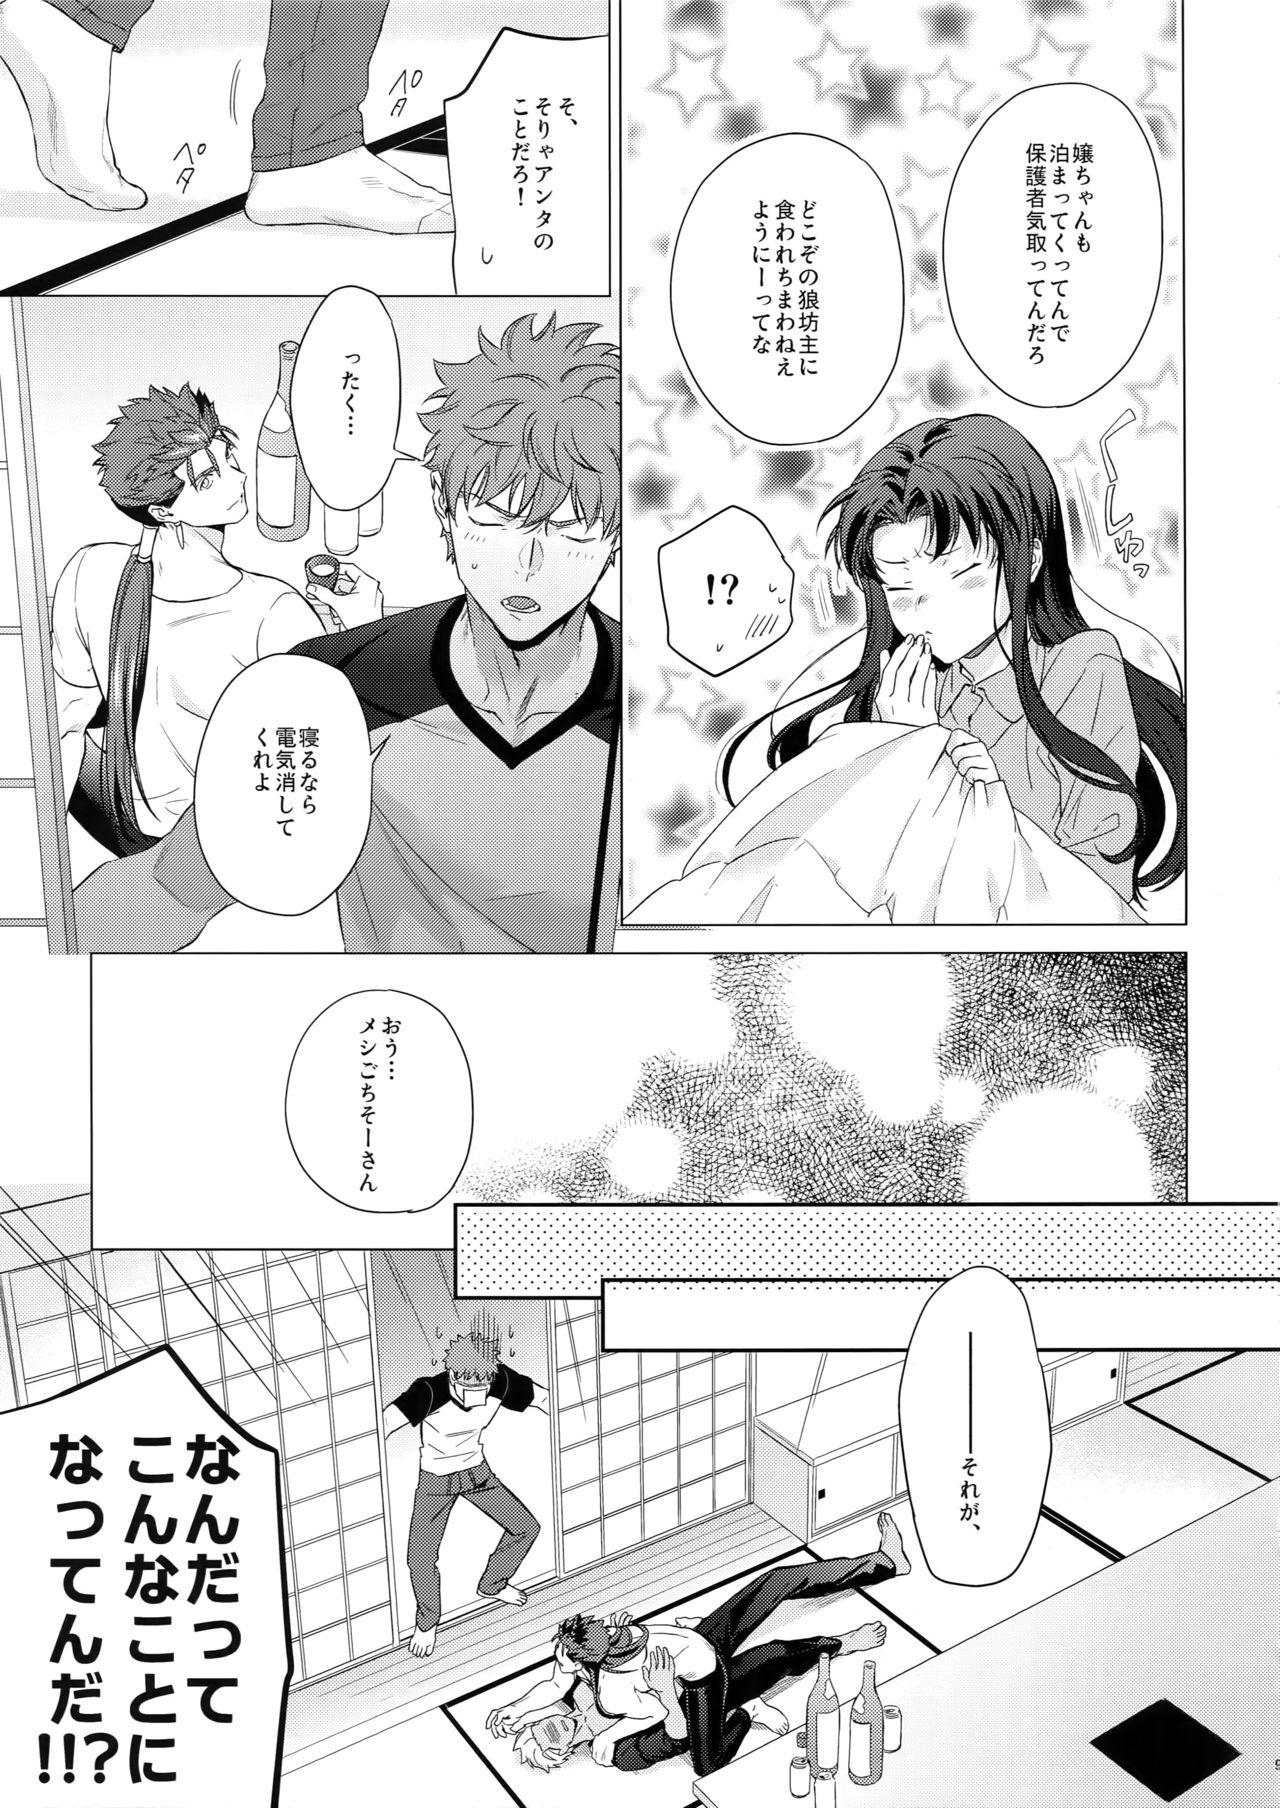 Sharing LIAR Liar - Fate stay night Scandal - Page 8